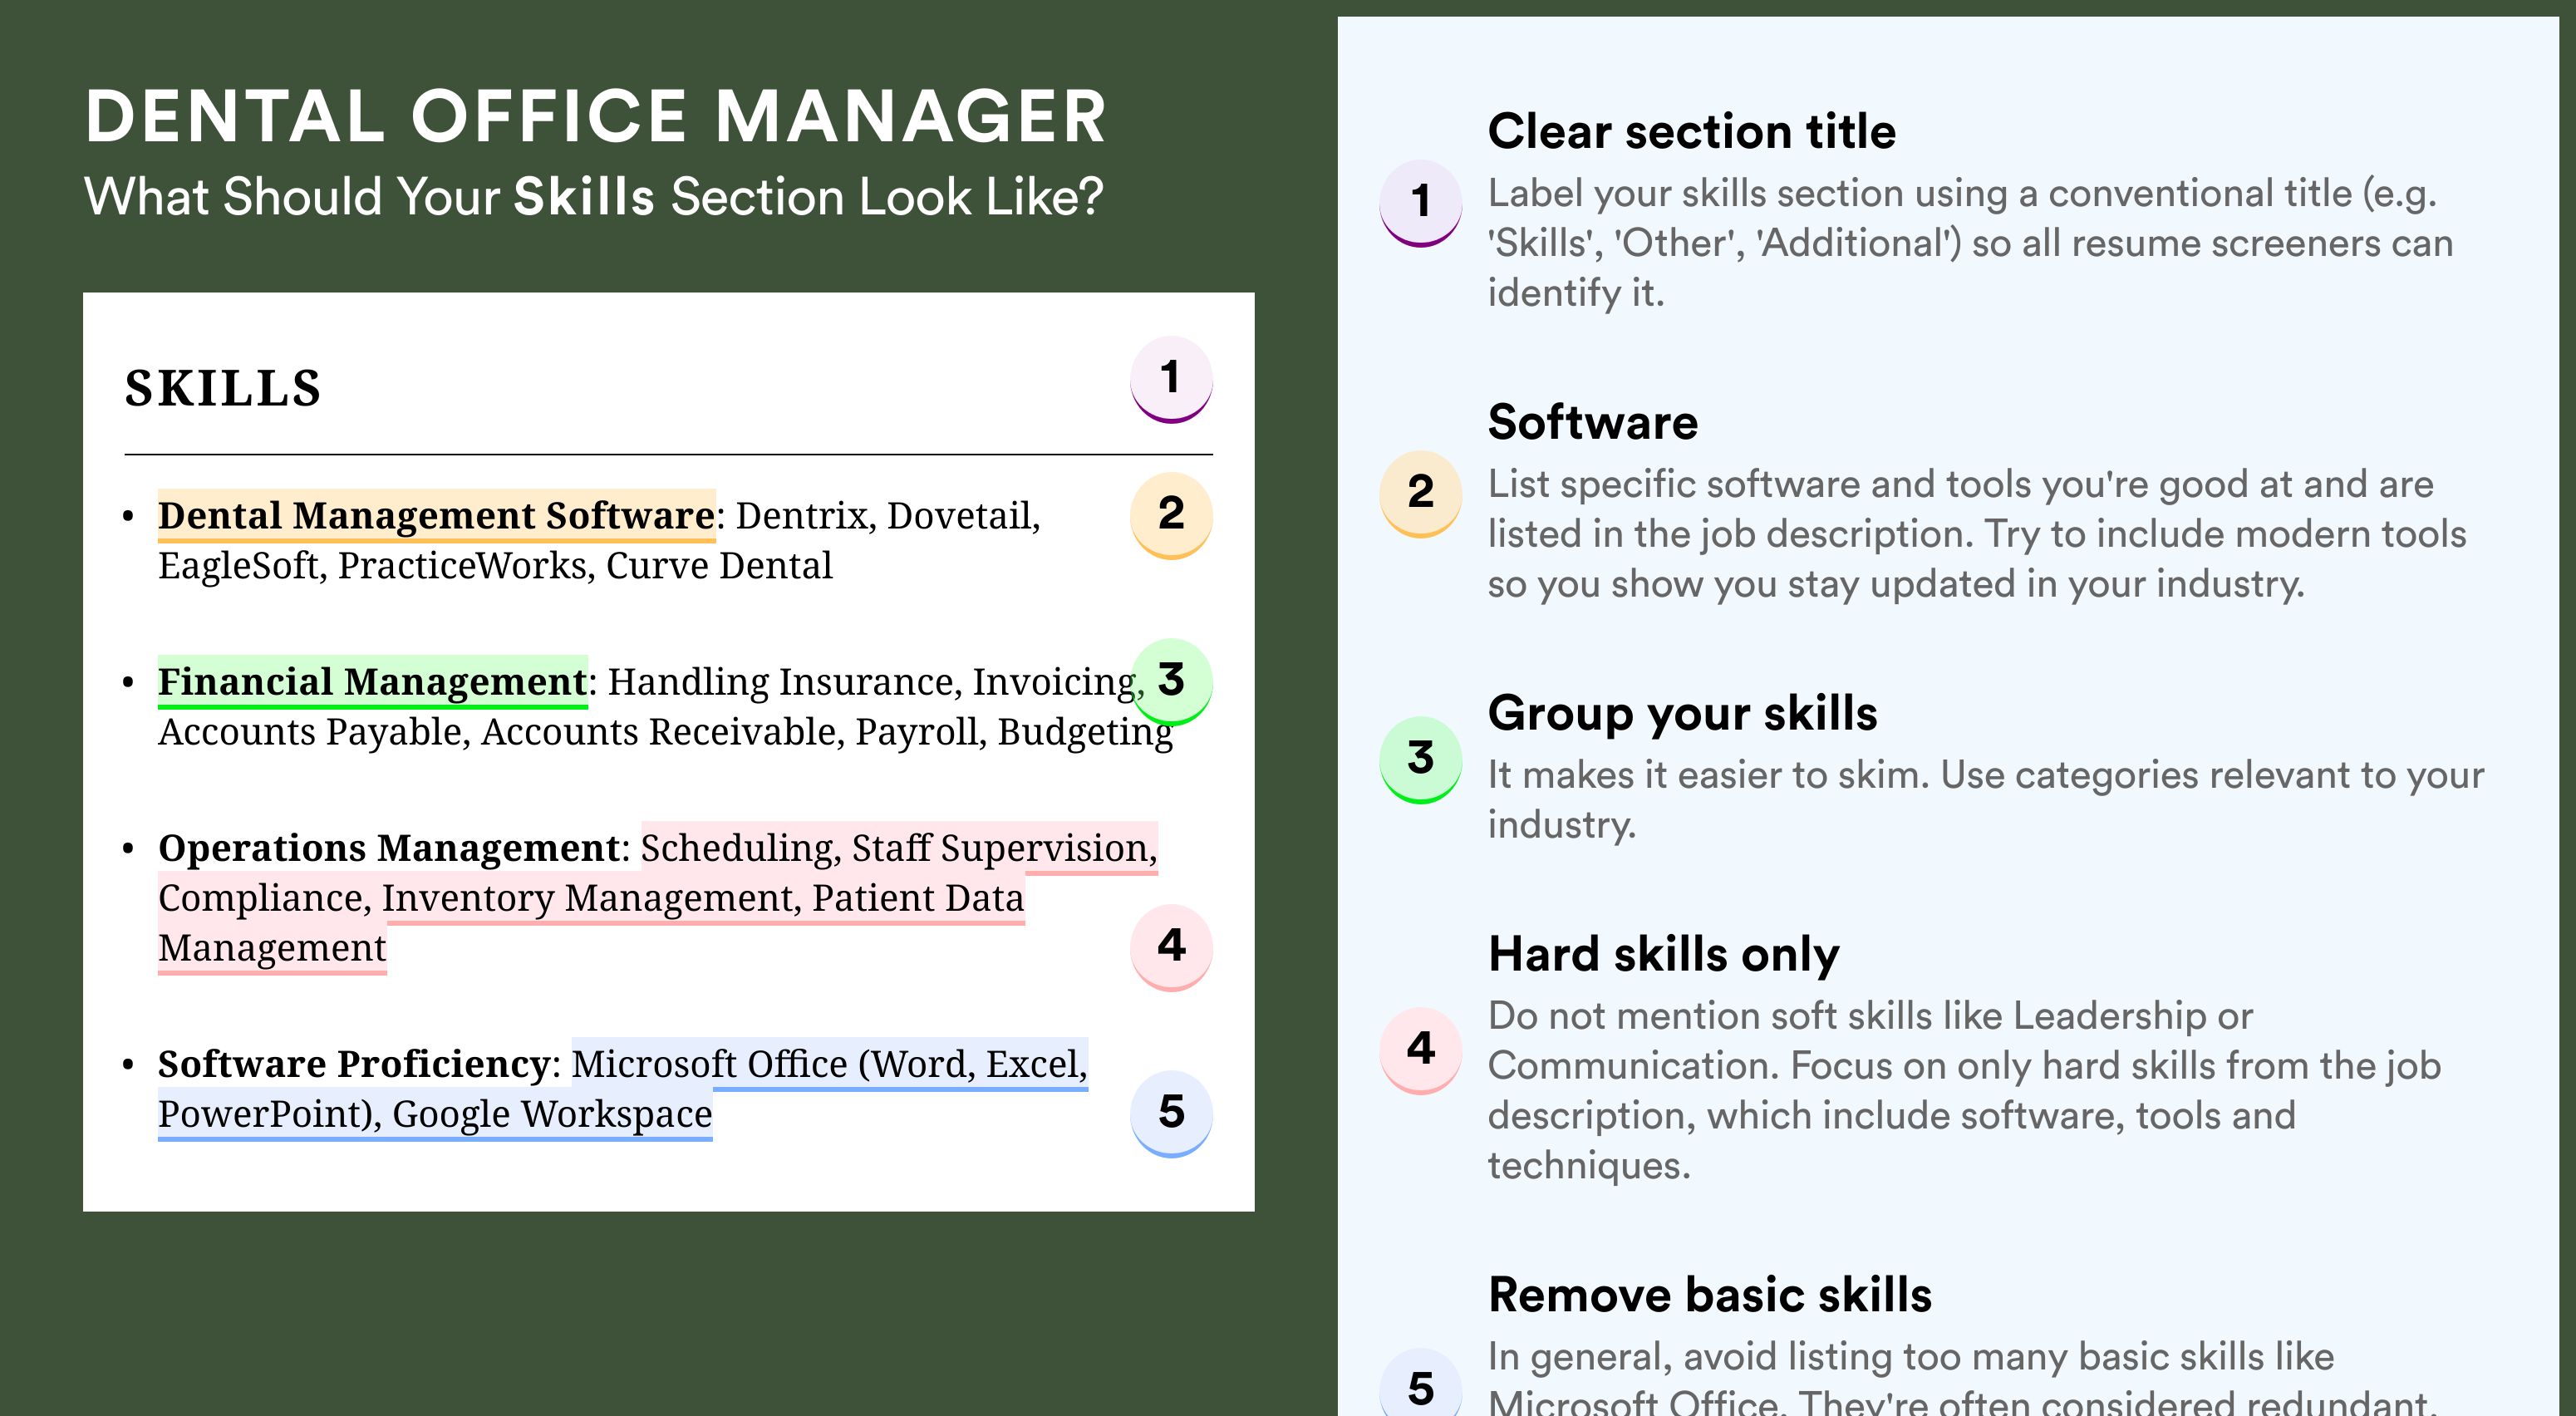 How To Write Your Skills Section - Dental Office Manager Roles